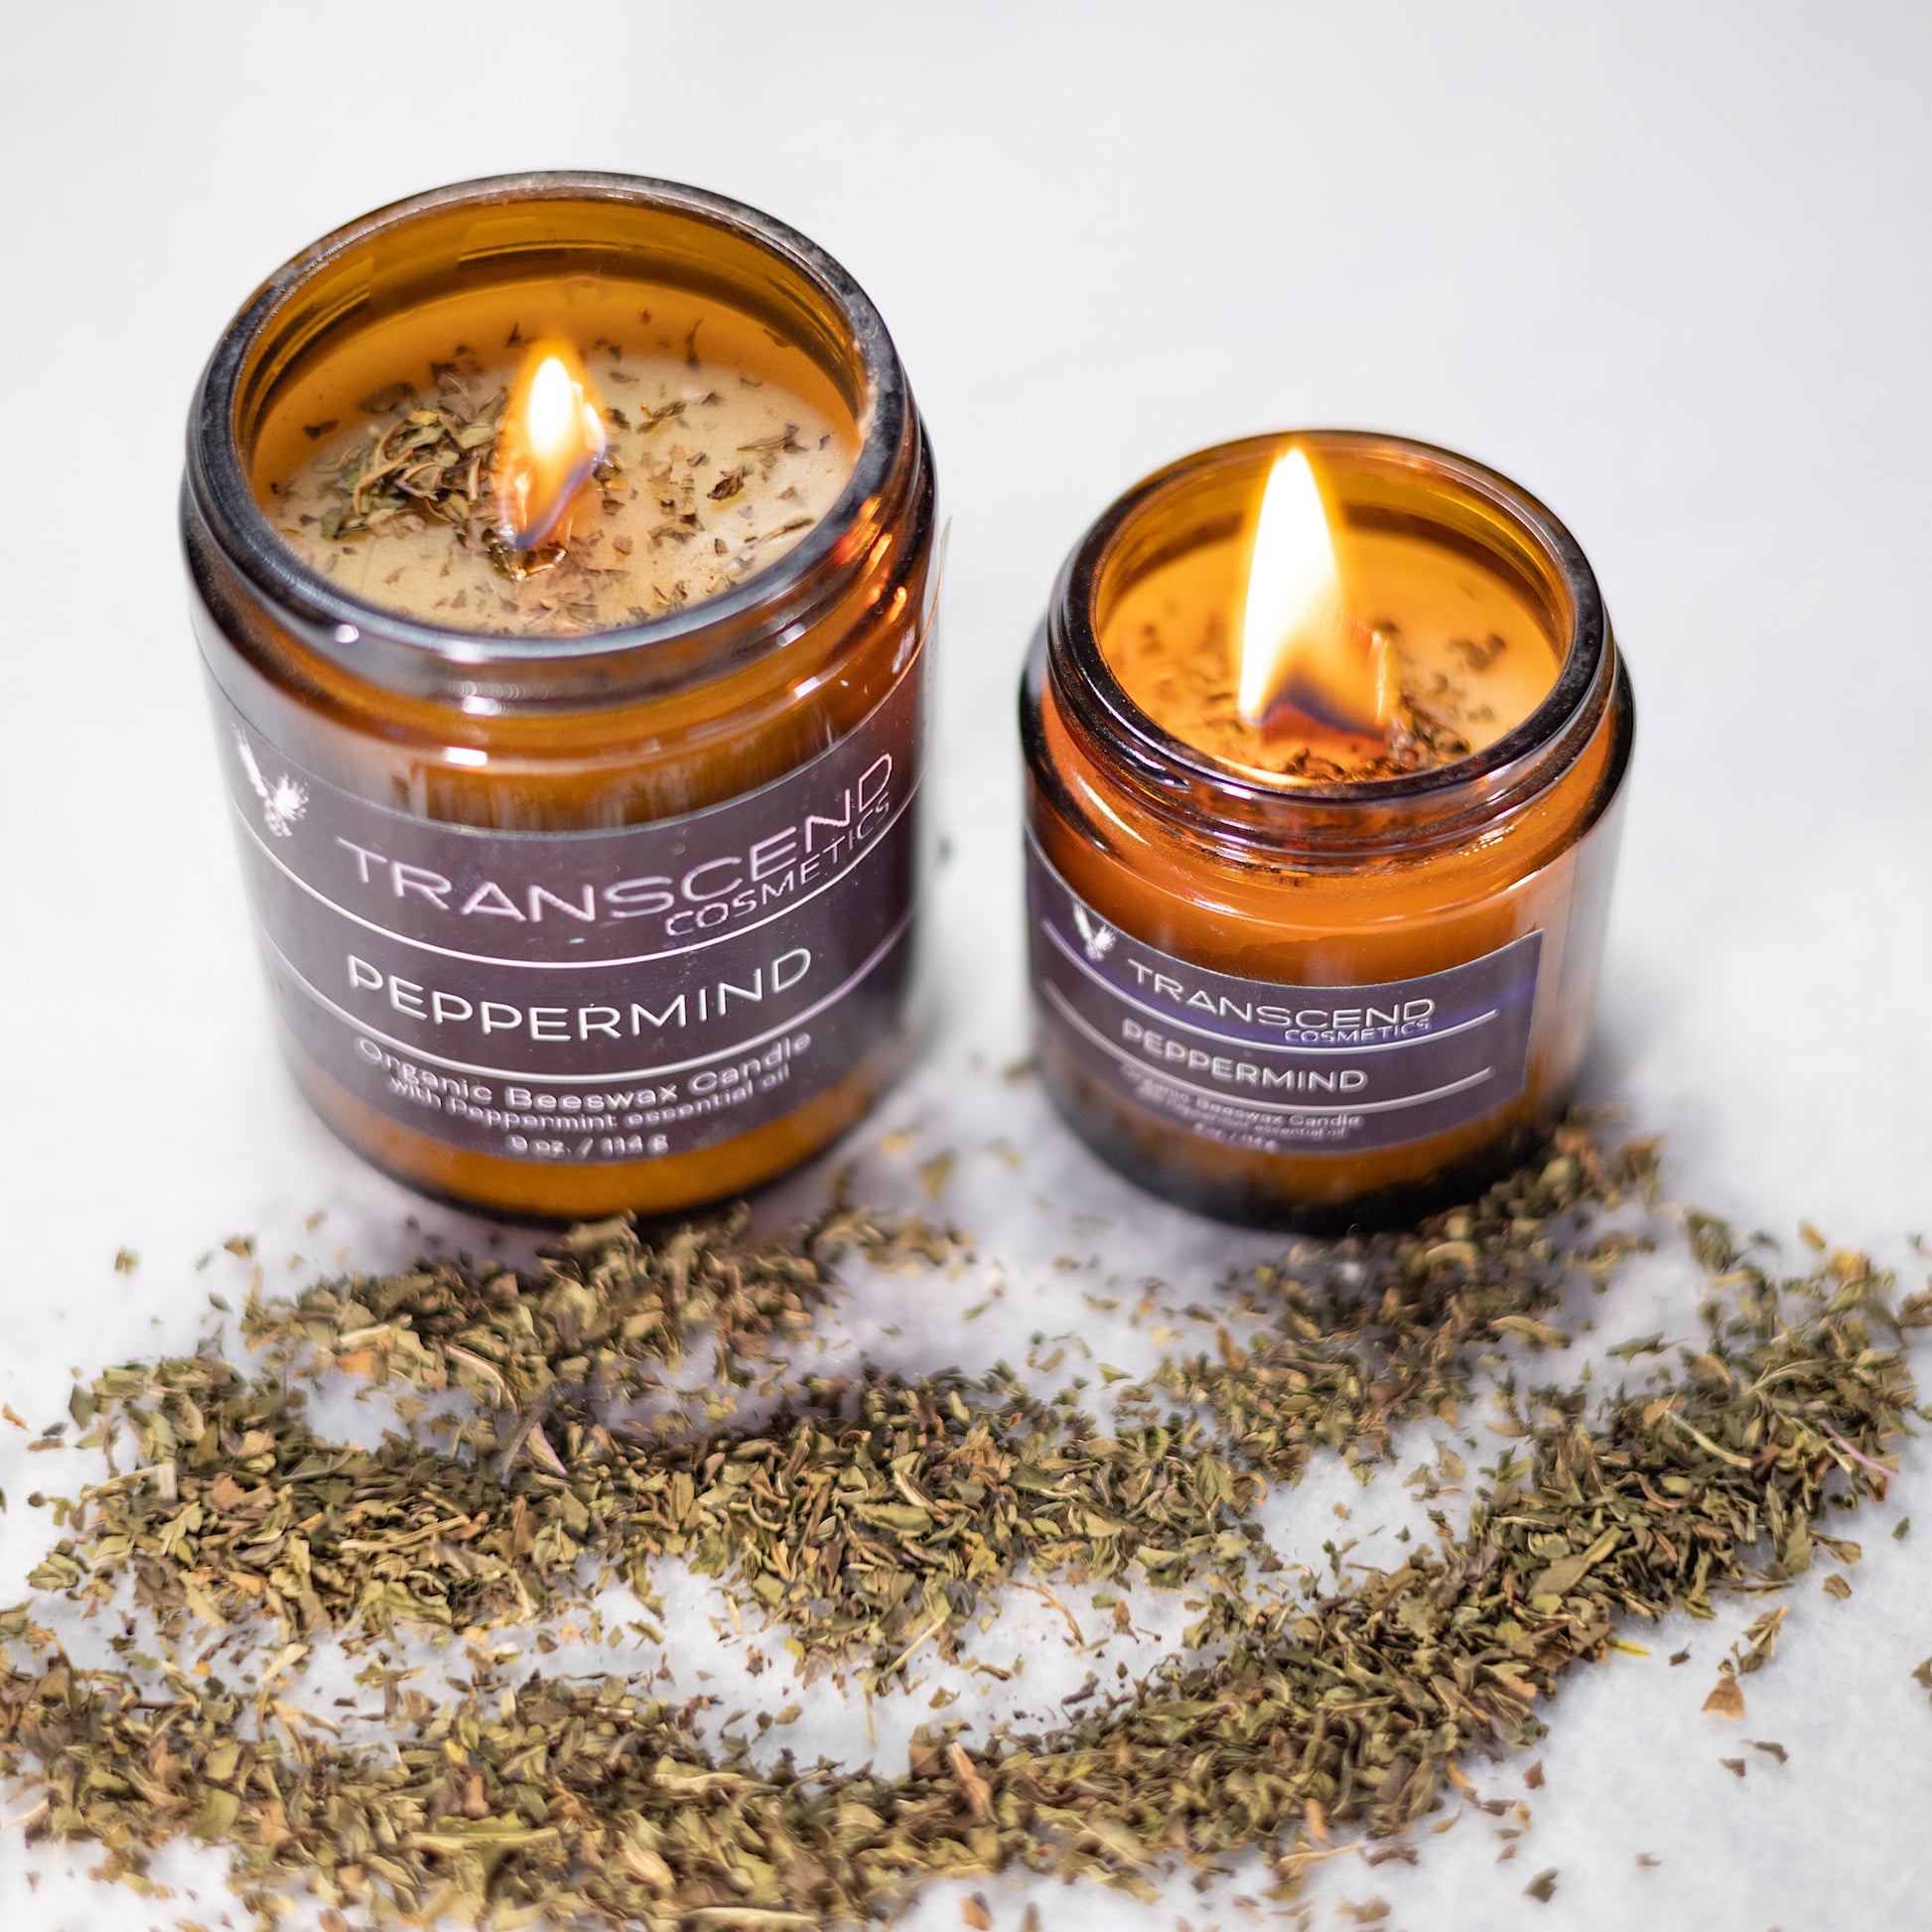 organic candle,natural candles, transcend cosmetics candle, transcend cosmetics, transcend cosmetics beeswax candle,essential oil, essential oil candle, candle, beeswax candle, peppermind, peppermind candle, peppermind beeswax candle, peppermint candle, peppermint essential oil